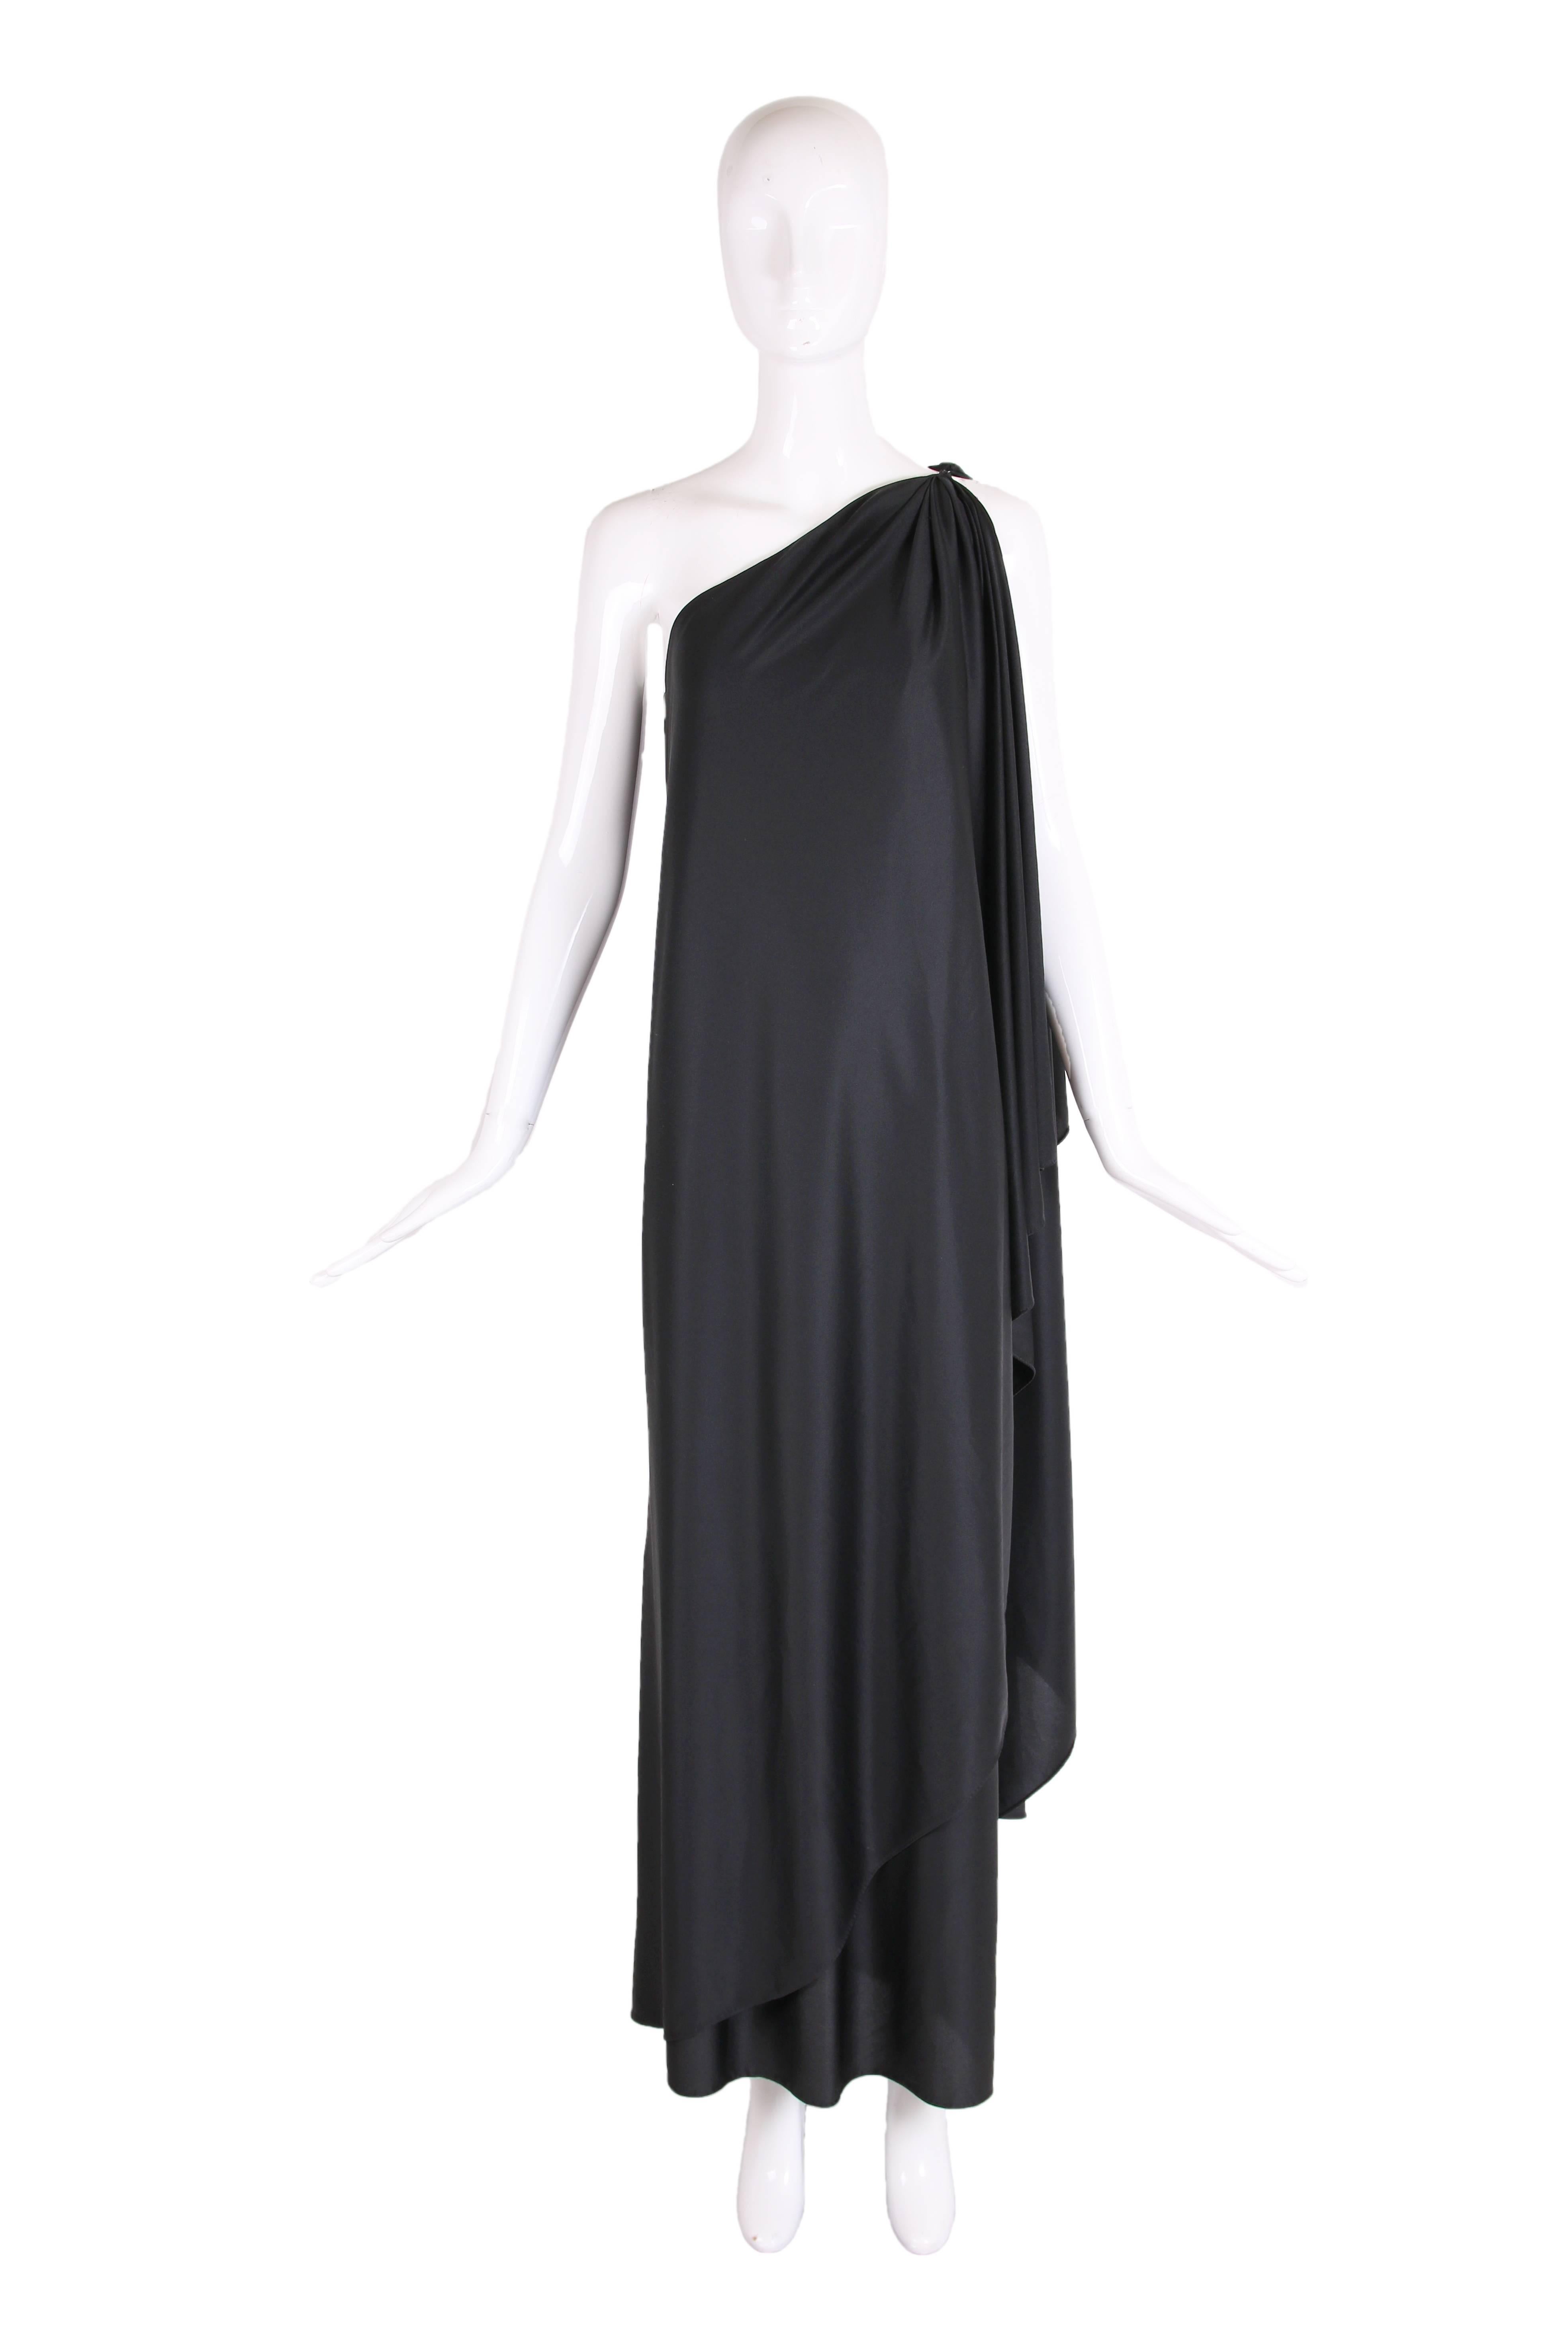 1979 Halston IV black single shoulder Dorian gown with draped panels at back and front. There is no fabric tag but it feels like a jersey or a jersey blend or a silk jersey - these are just guesses. In excellent condition. Please consult